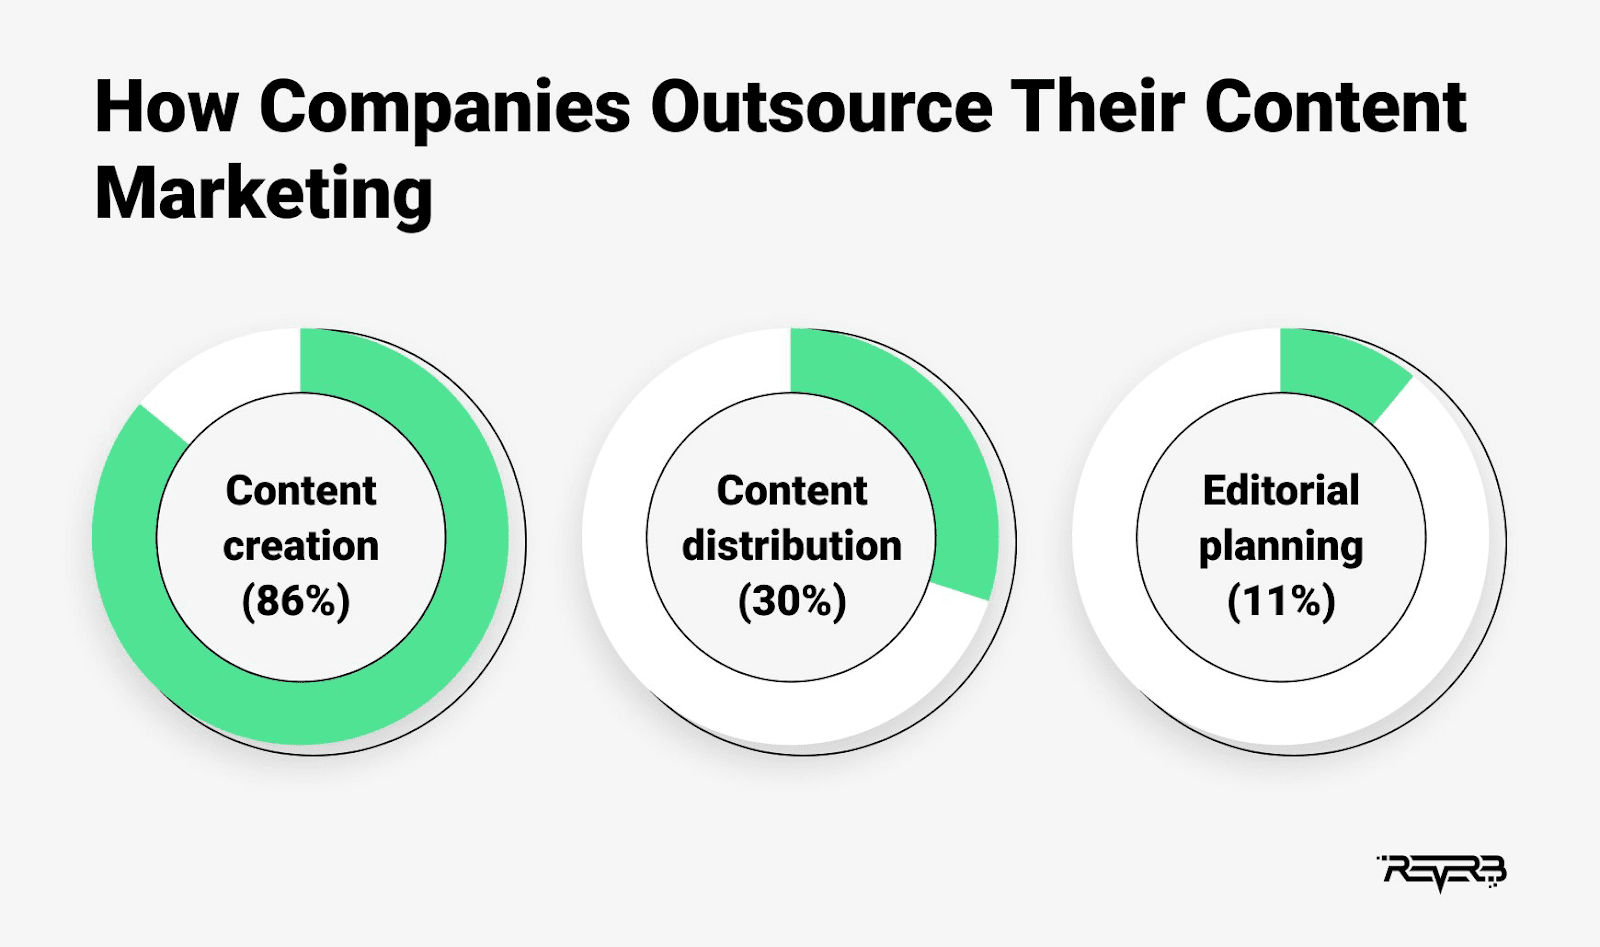 86% of companies outsource their content creation.